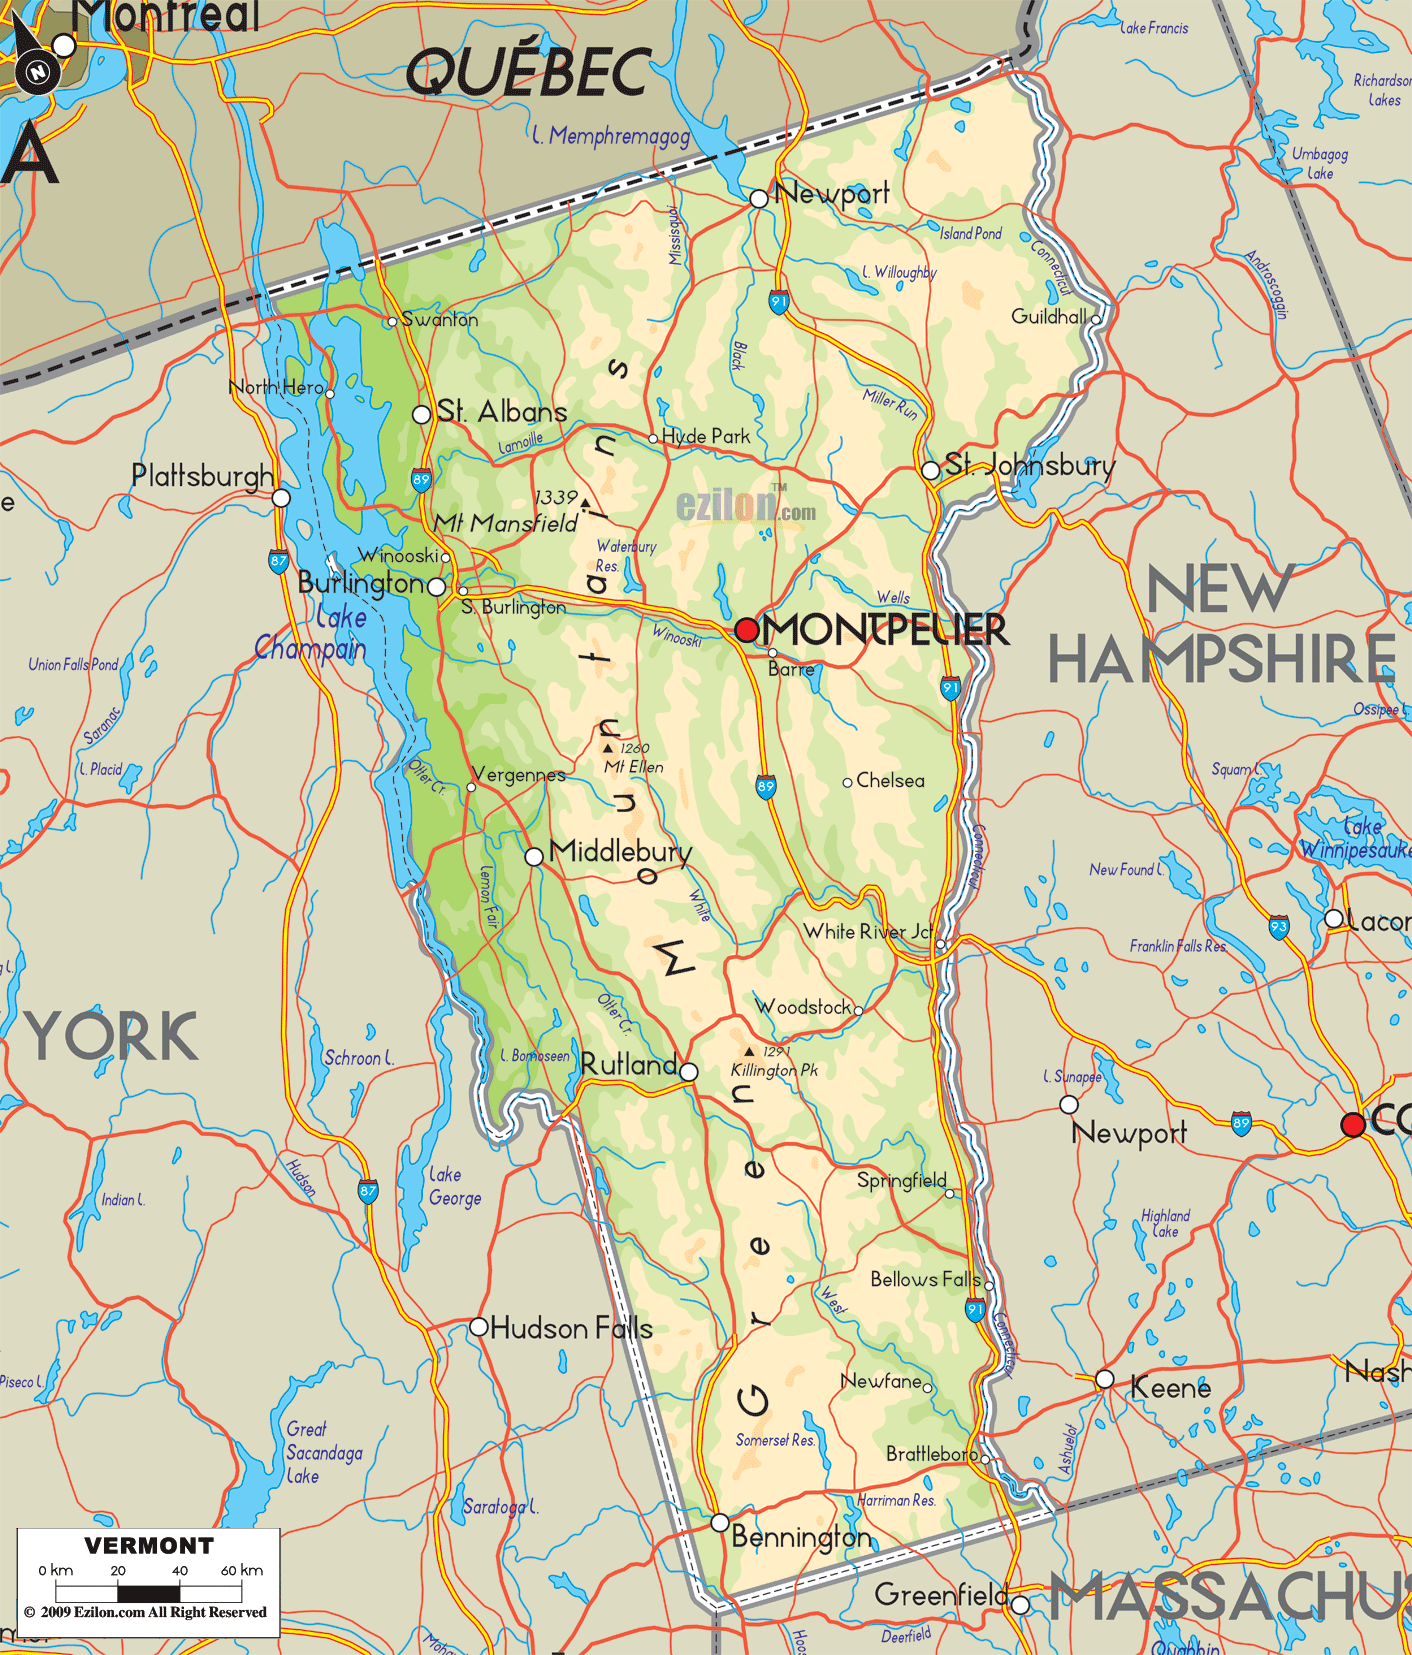 Detailed physical map of Vermont showing major geographical features such as rivers, lakes, mountains, topography and land formations.